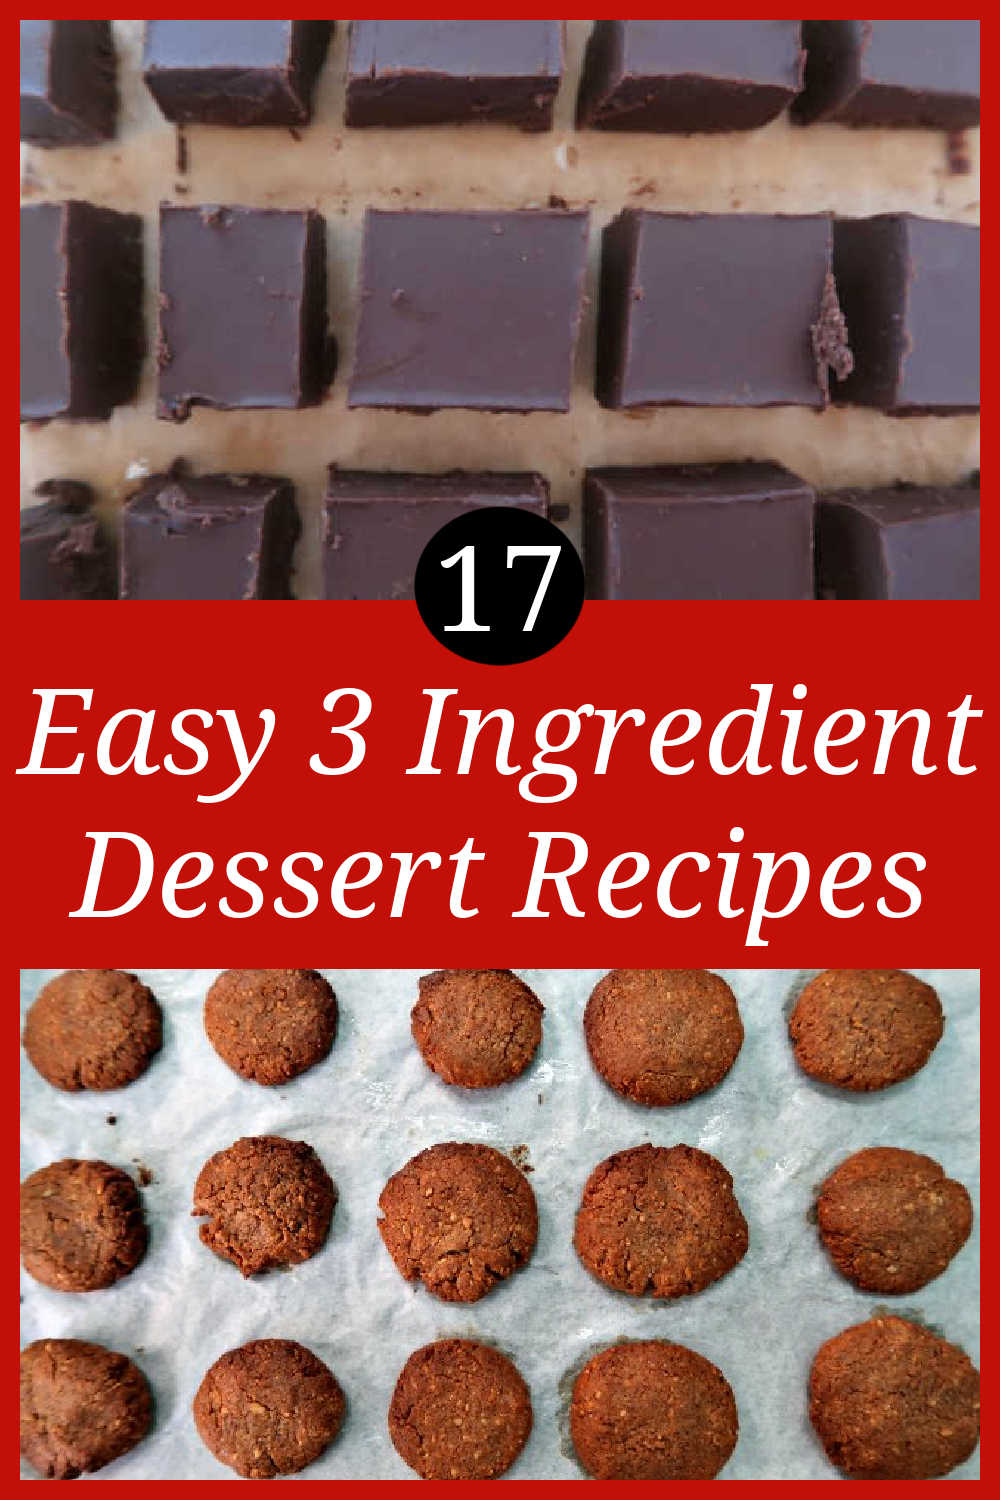 17 Easy 3 Ingredient Desserts - How to make quick and incredible impressive dessert recipes with only three ingredients.